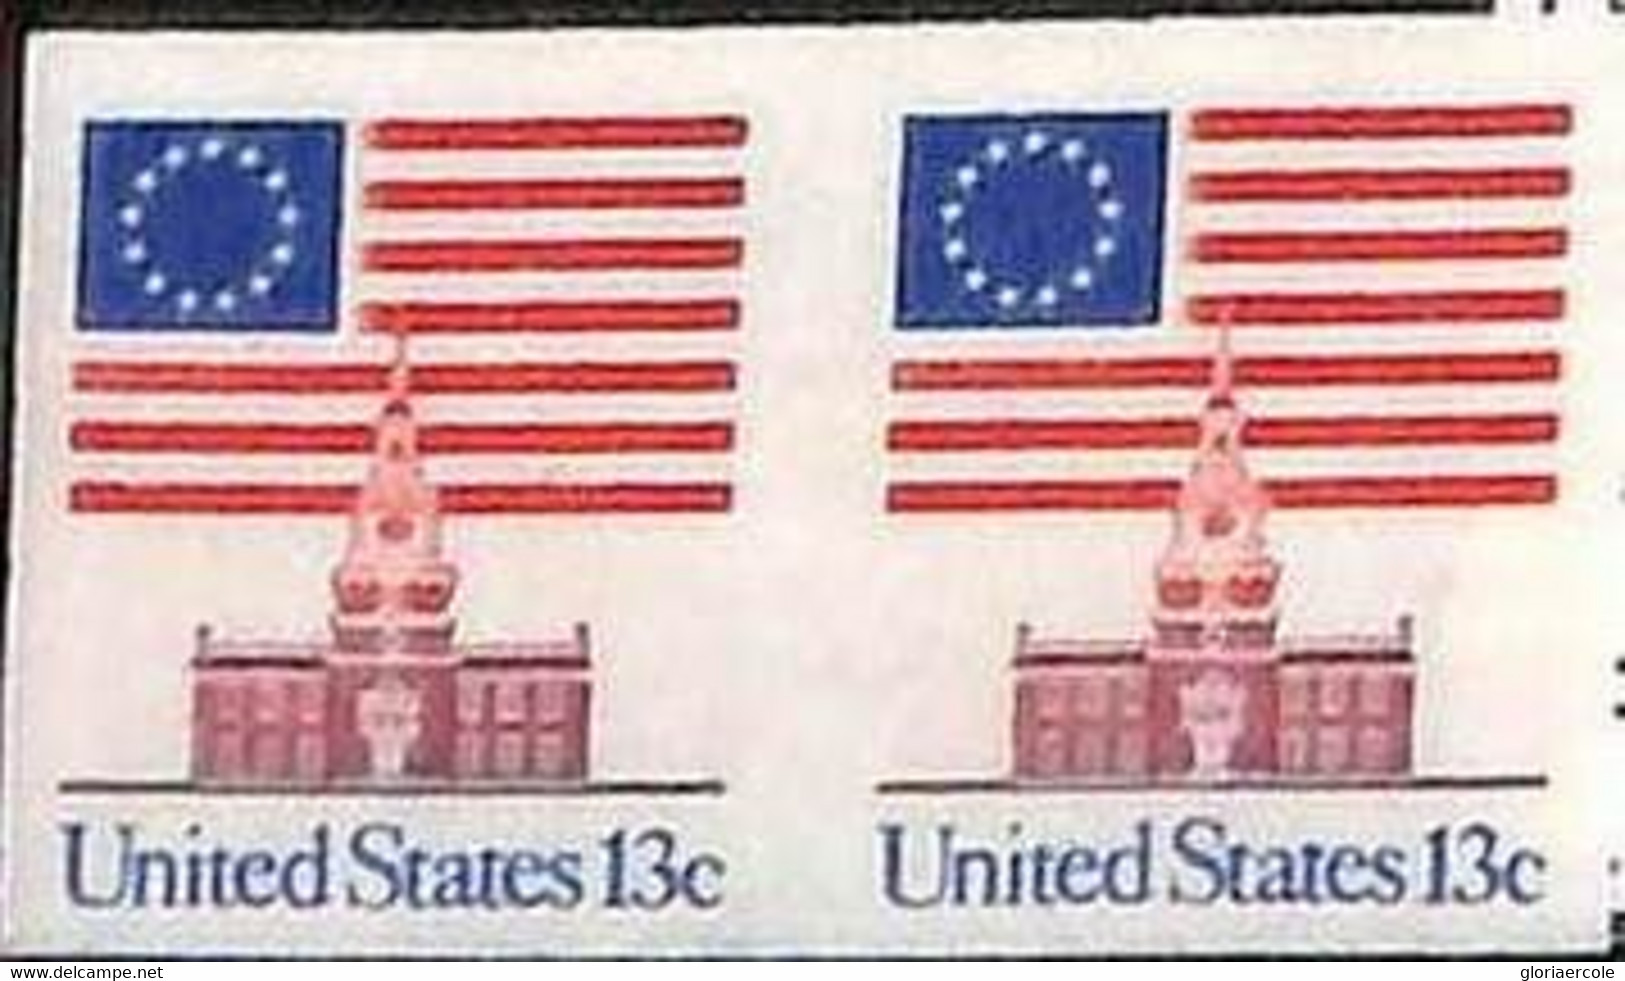 94807e -  USA - STAMPS - SC #  1625a  IMPERF PAIR - MNH Flags ARCHITECTURE - Errors, Freaks & Oddities (EFOs)